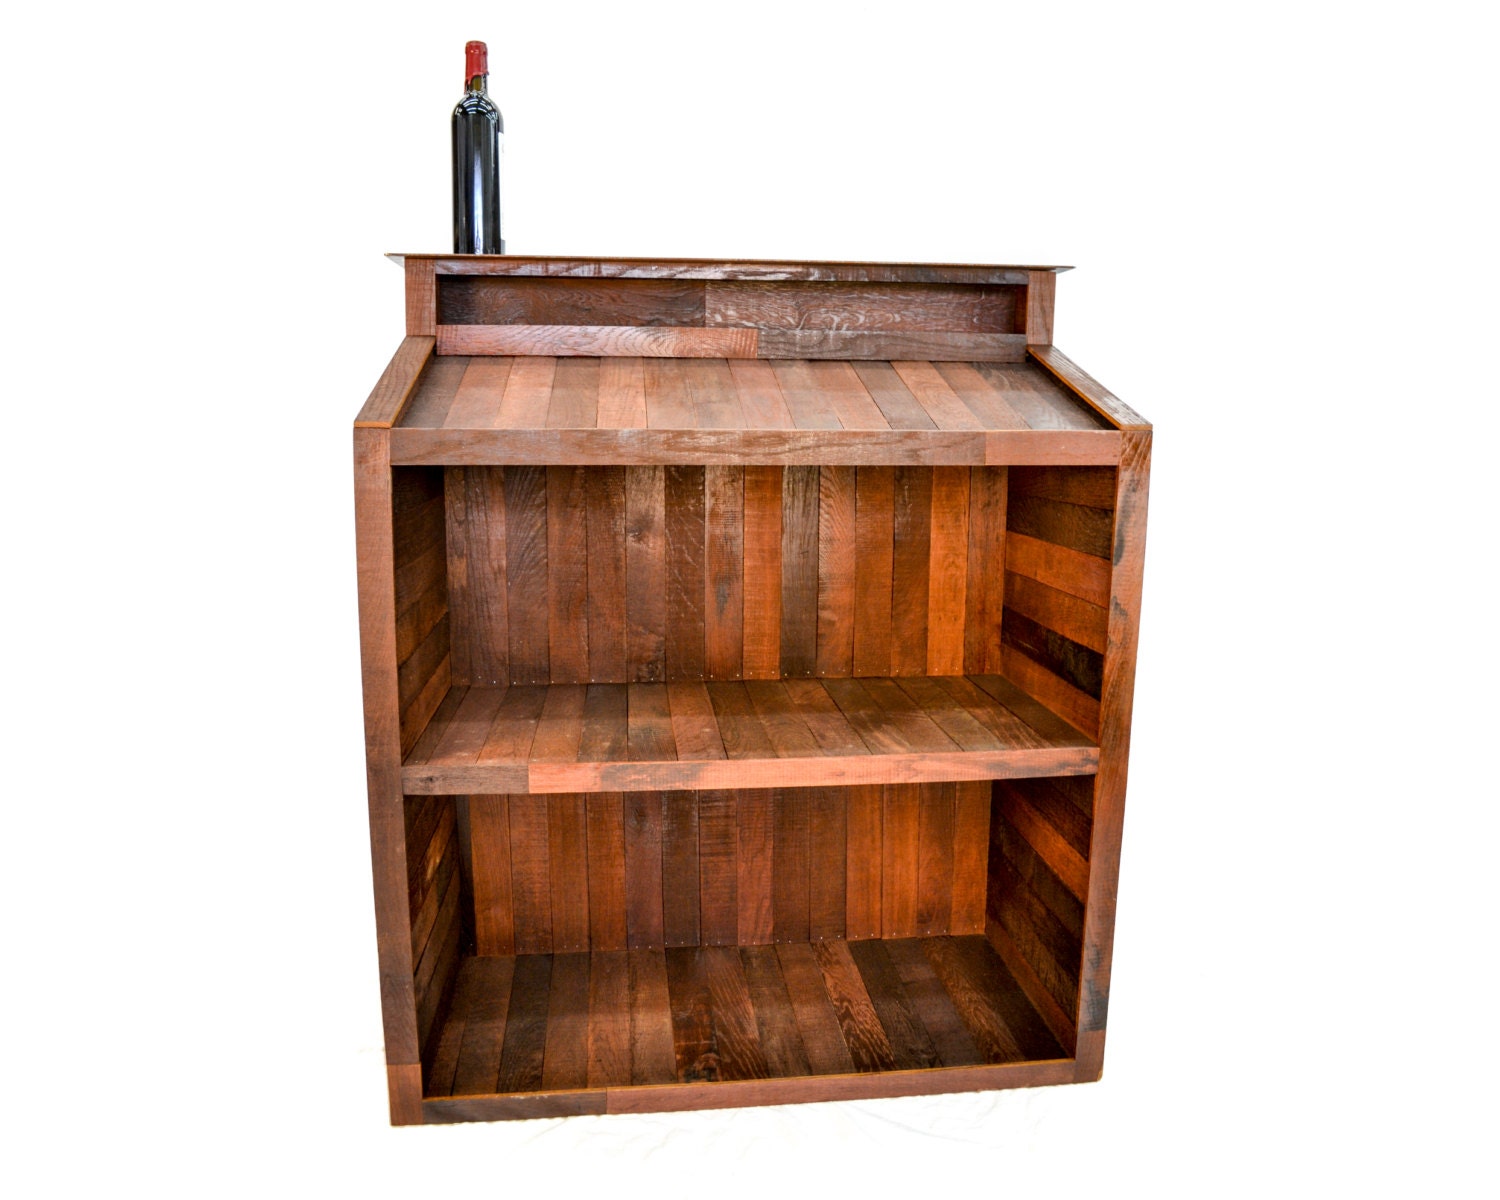 Hostess POS Valet Stand - Arnold - Made from retired California wine barrels. 100% Recycled!